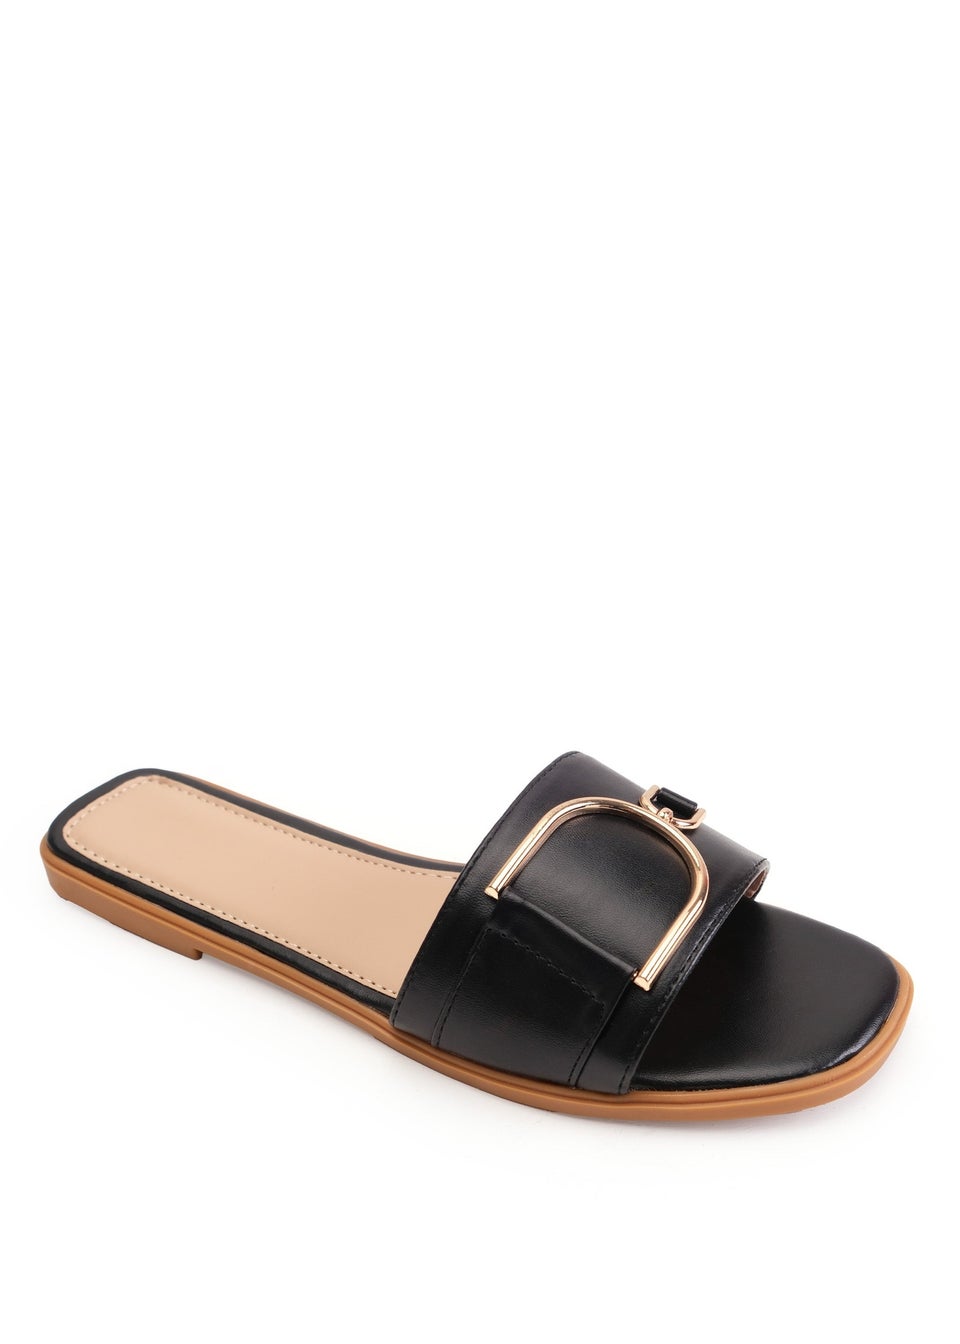 Where's That From Black Pu Olivia Buckle Strap Sandals